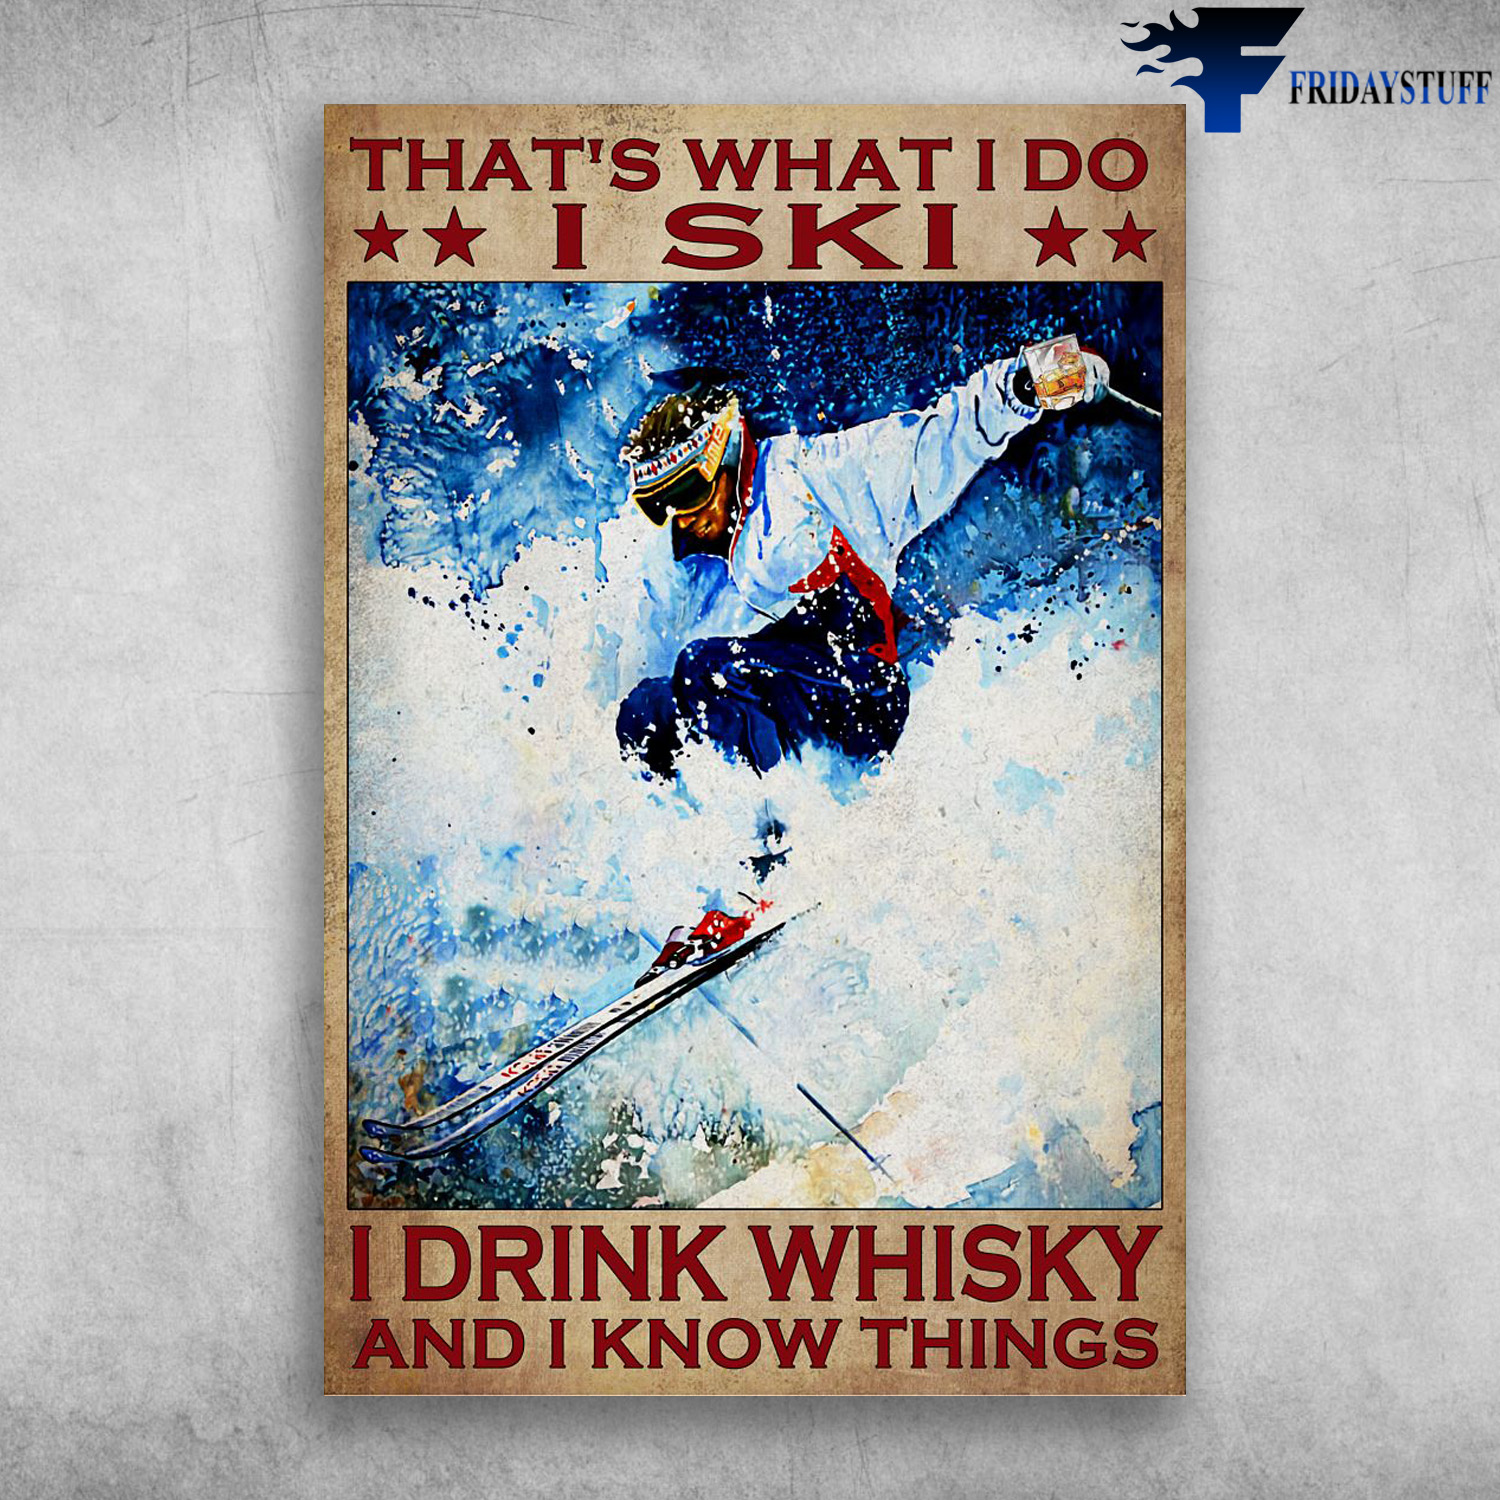 Man Skiing - That's What I Do, I Ski, I Drink Whisky And I Know Things